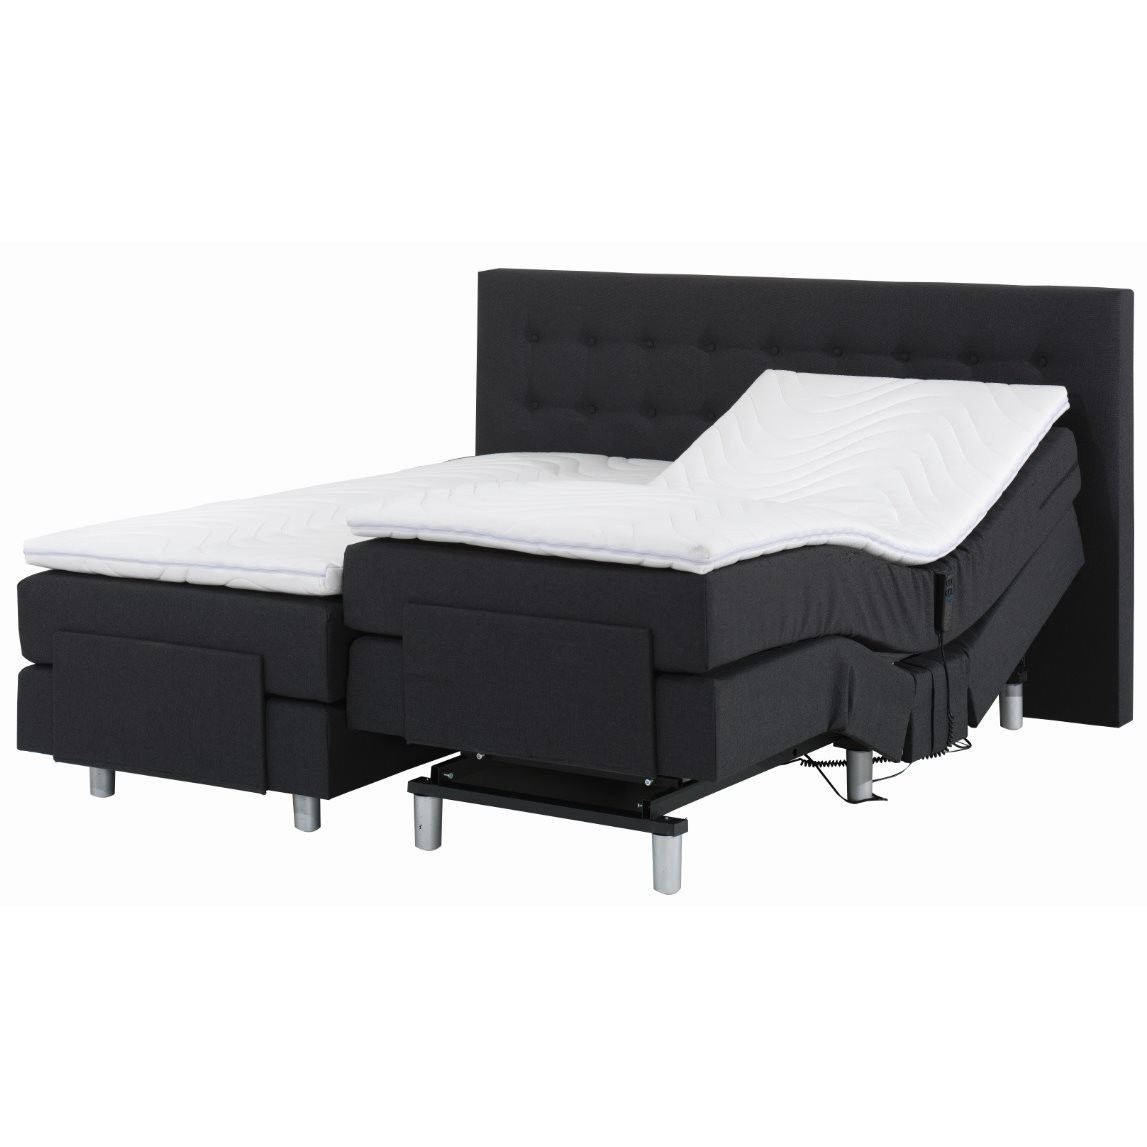 Rent a Boxspringbed electric 2 persons 180x210? Rent at KeyPro furniture rental!